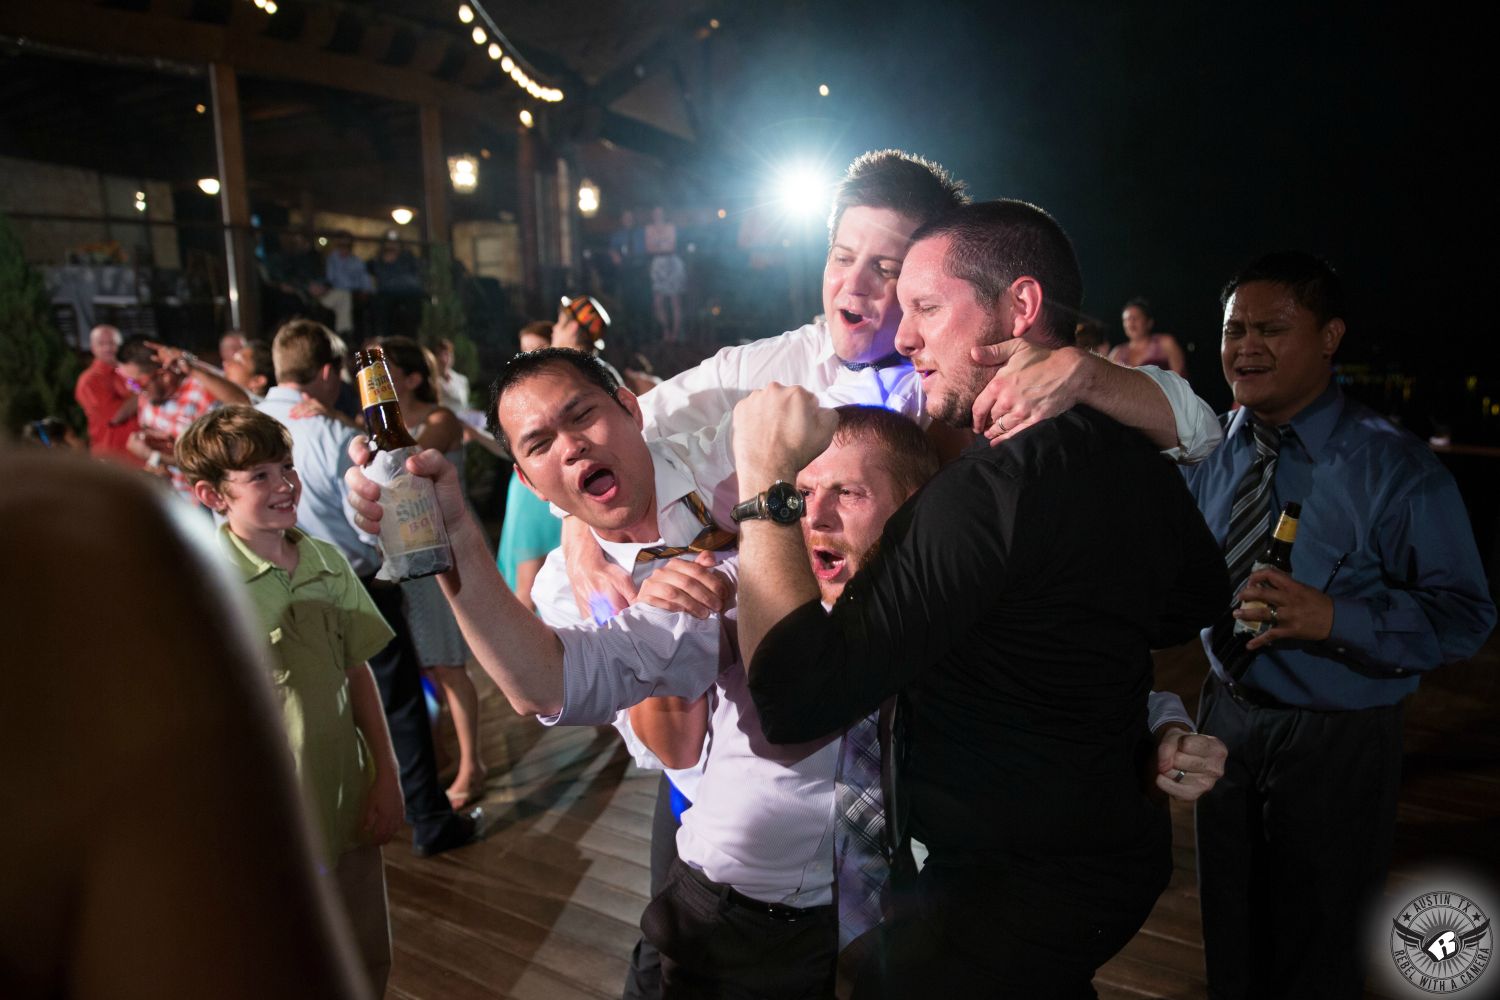 Austin wedding photography of super happy guys drinking Shiner beer dancing to the tunes of Live Oak DJ at wedding reception on the lower deck at Austin wedding venue Nature's Point on the shores of Lake Travis.